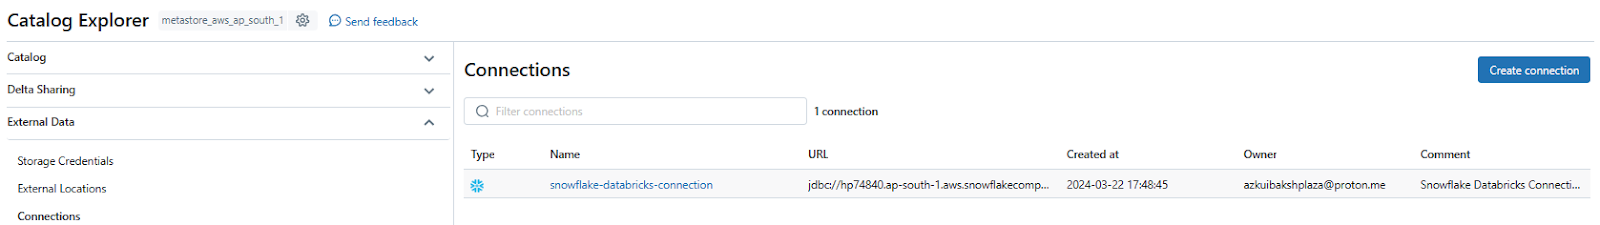 Navigating to Catalog Explorer section and clicking on recently created connection - Databricks Lakehouse Federation